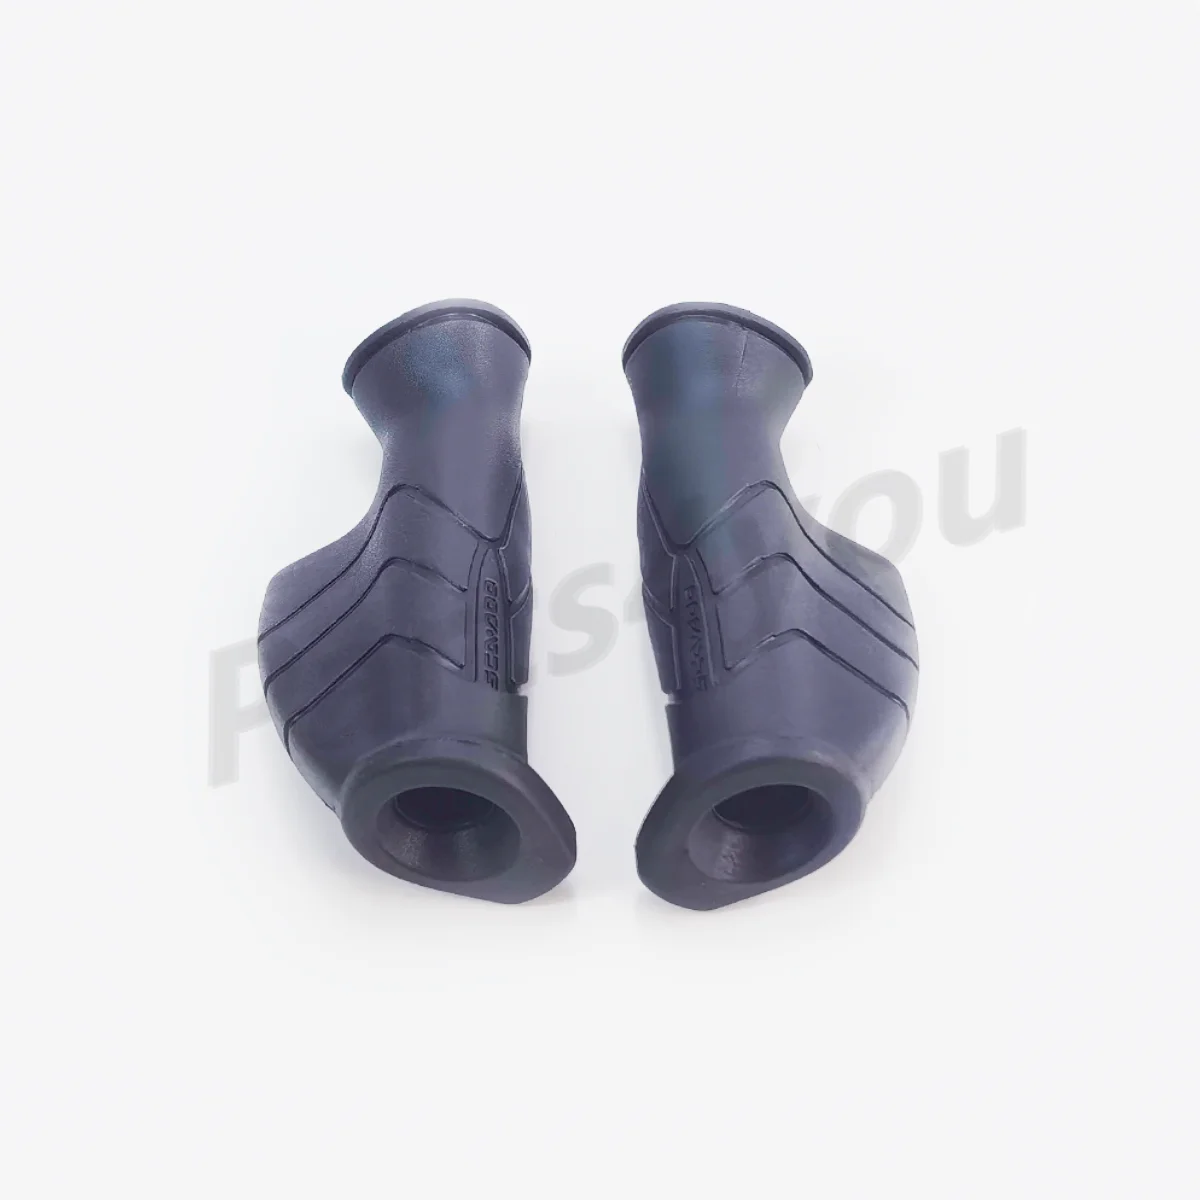 Handle Grip for Sea-Doo GTI GTR GTX RXP RXT Wake Spark Fish Pro 90 130 155 170 180 215 230 260 300 900 ACE 277001958